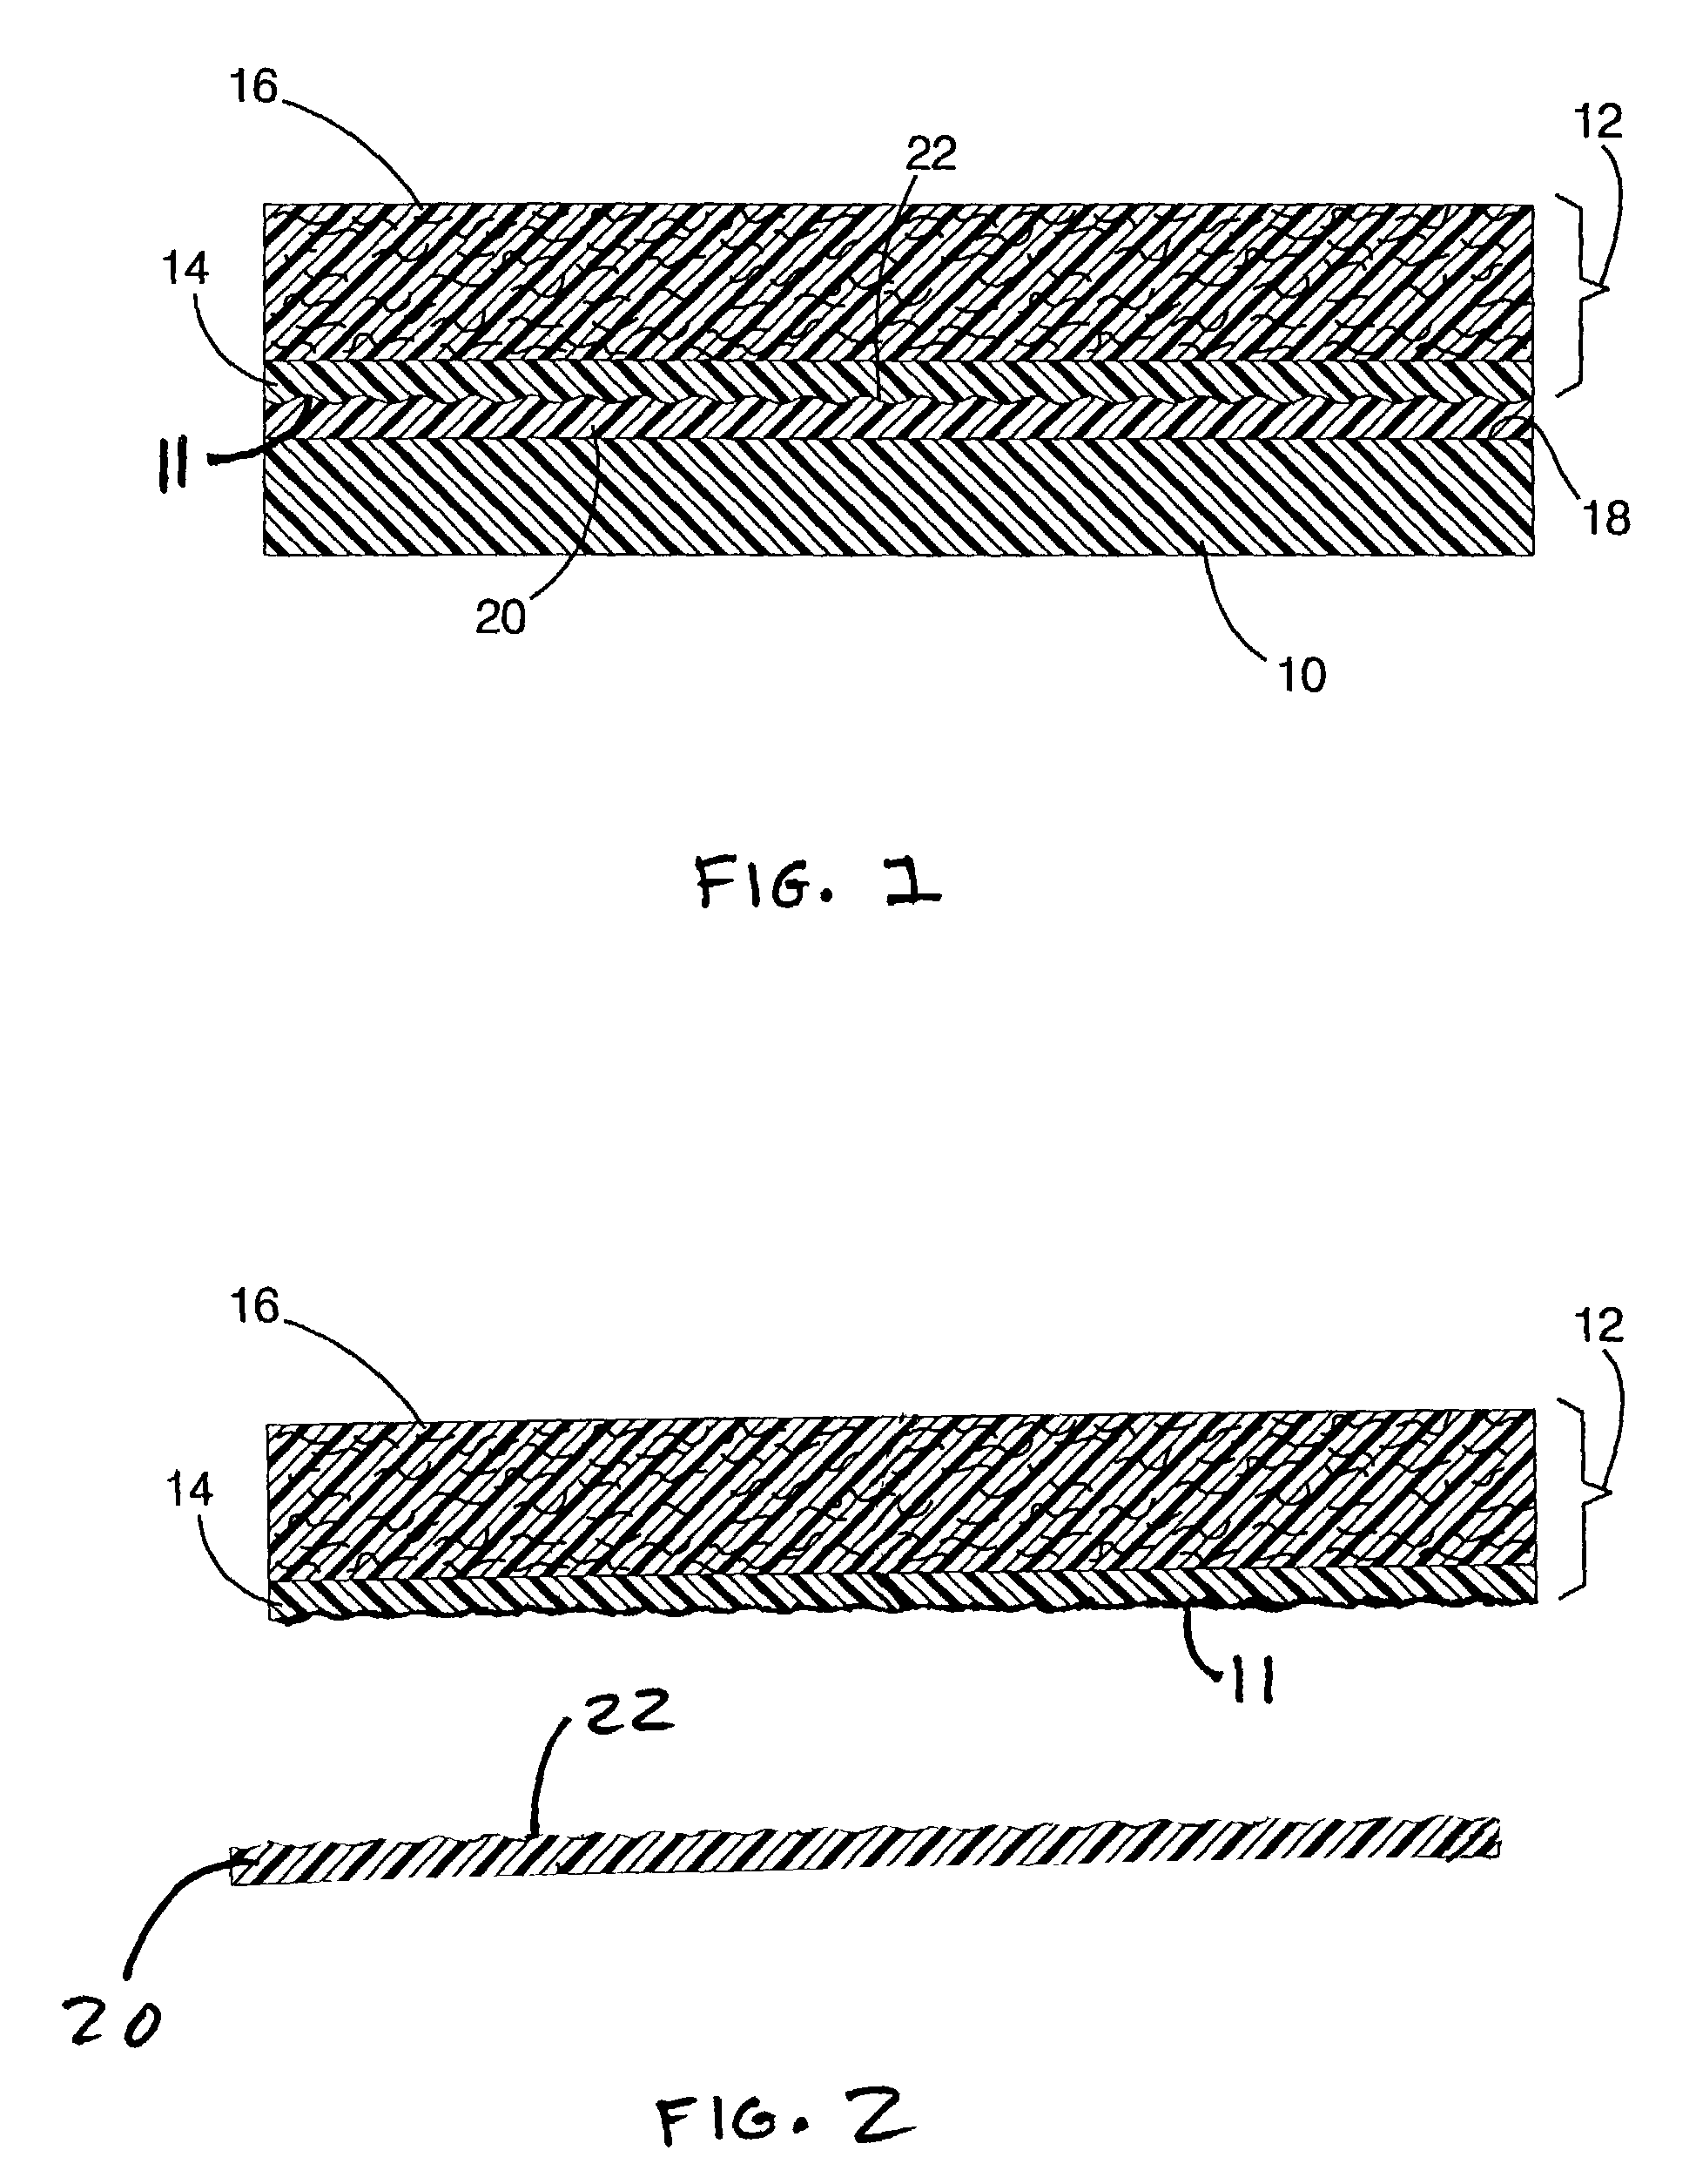 Method of forming a composite article with a textured surface